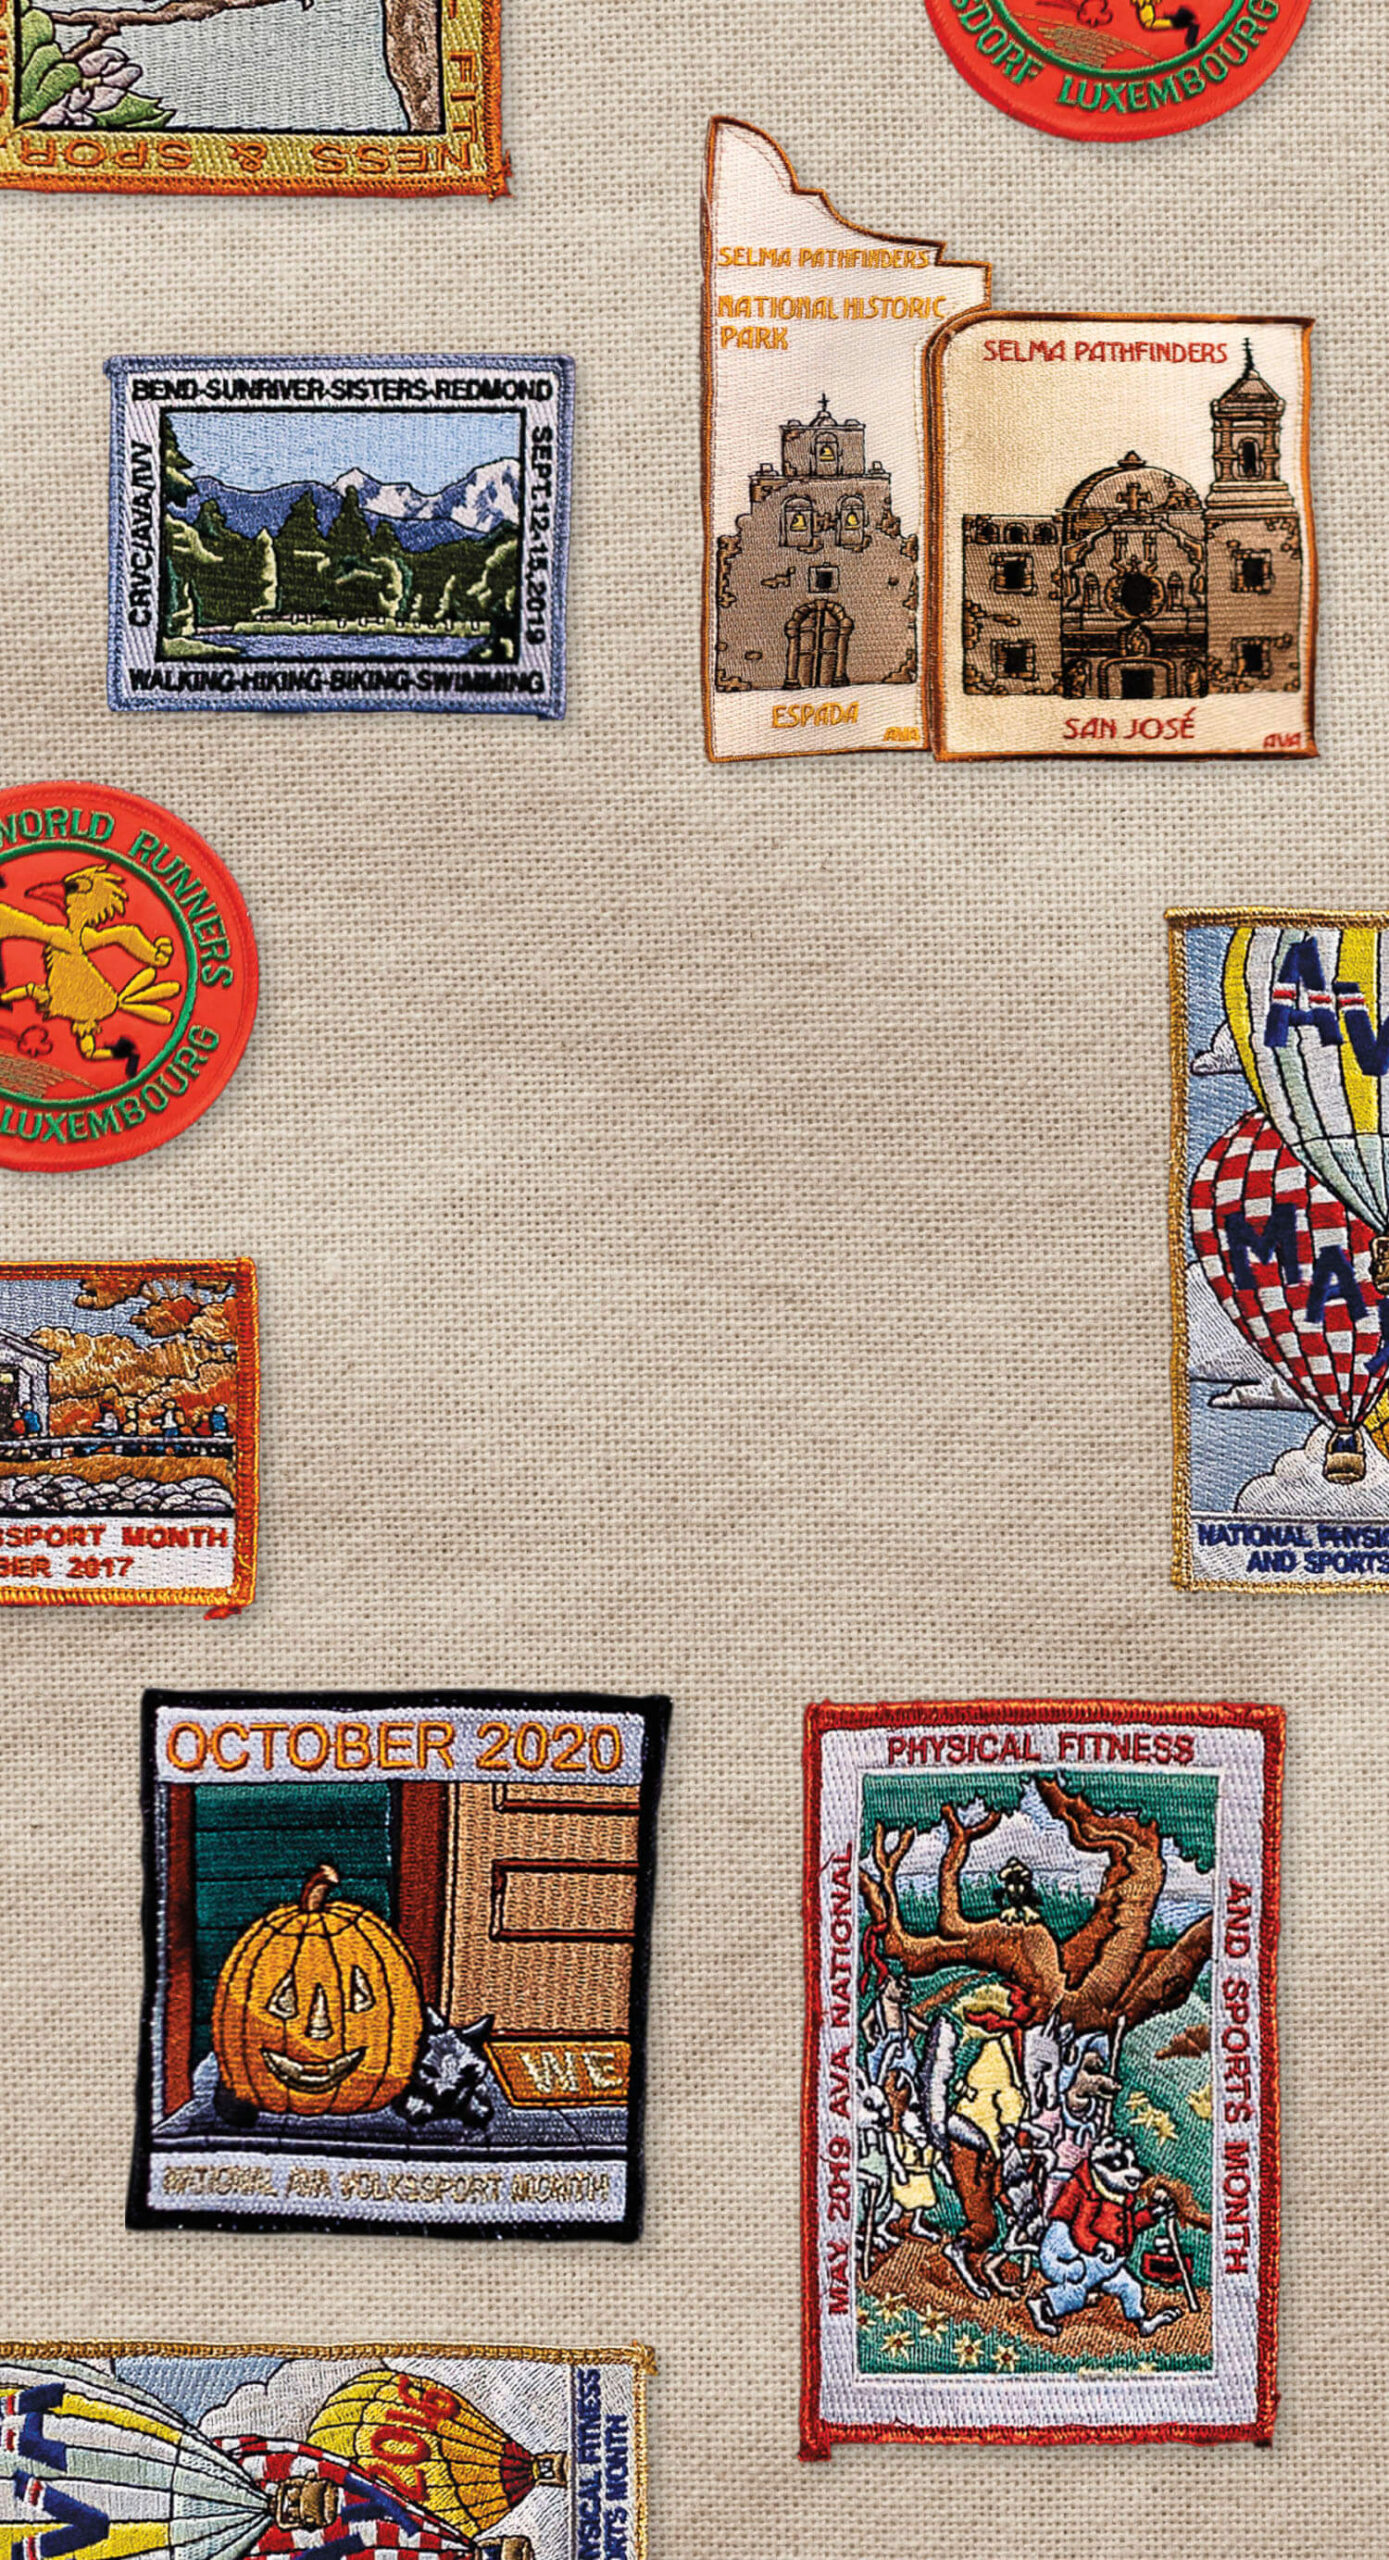 A photo of several brightly-colored sewn patches on a burlap background